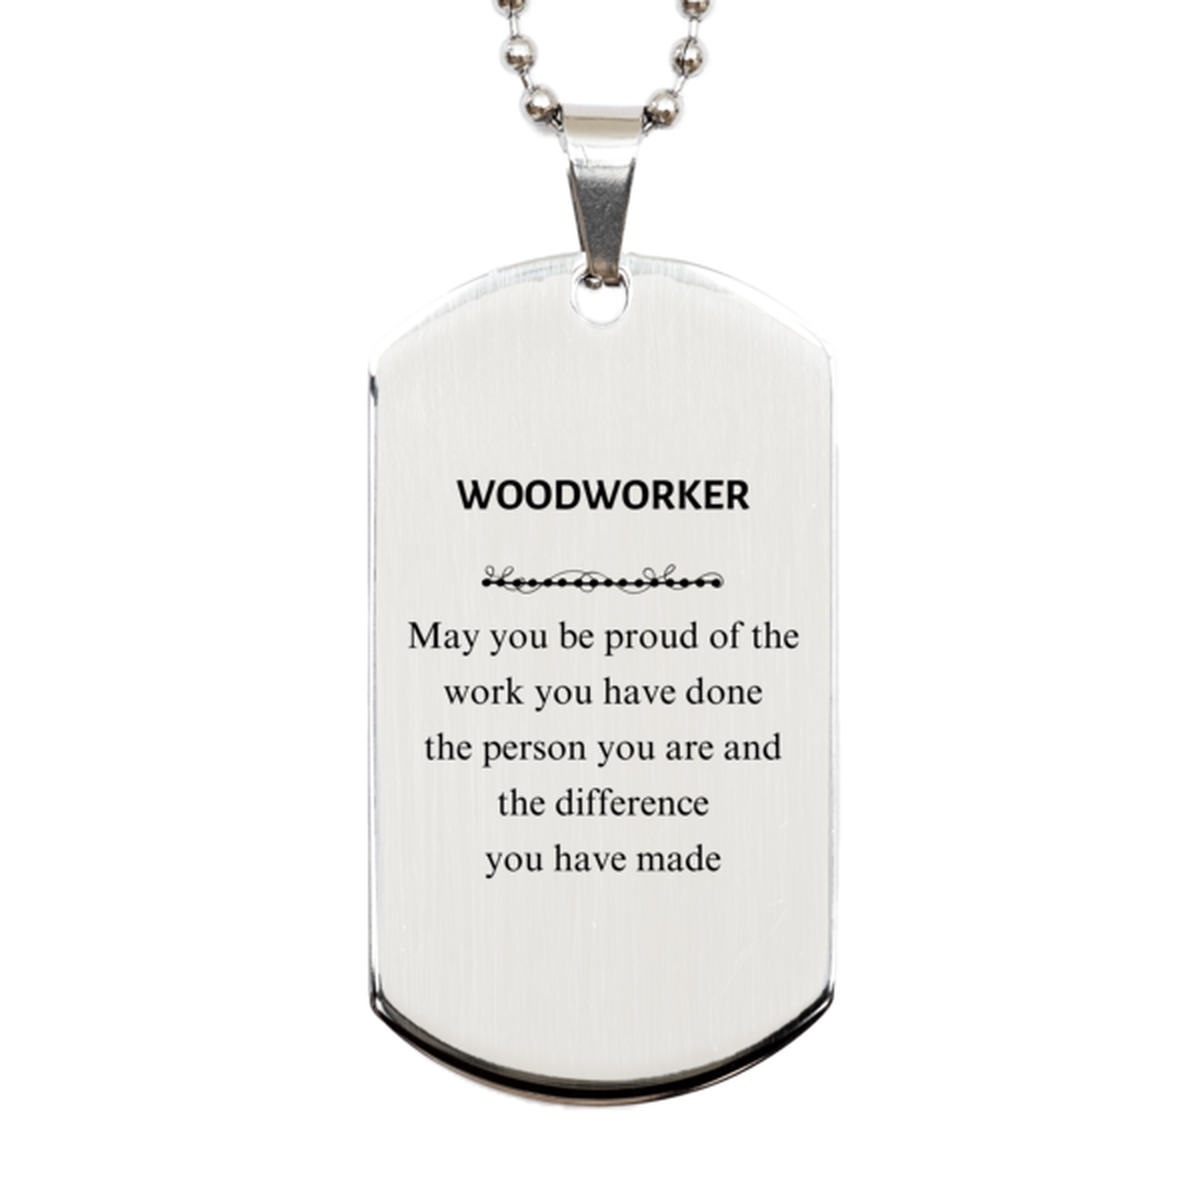 Woodworker May you be proud of the work you have done, Retirement Woodworker Silver Dog Tag for Colleague Appreciation Gifts Amazing for Woodworker